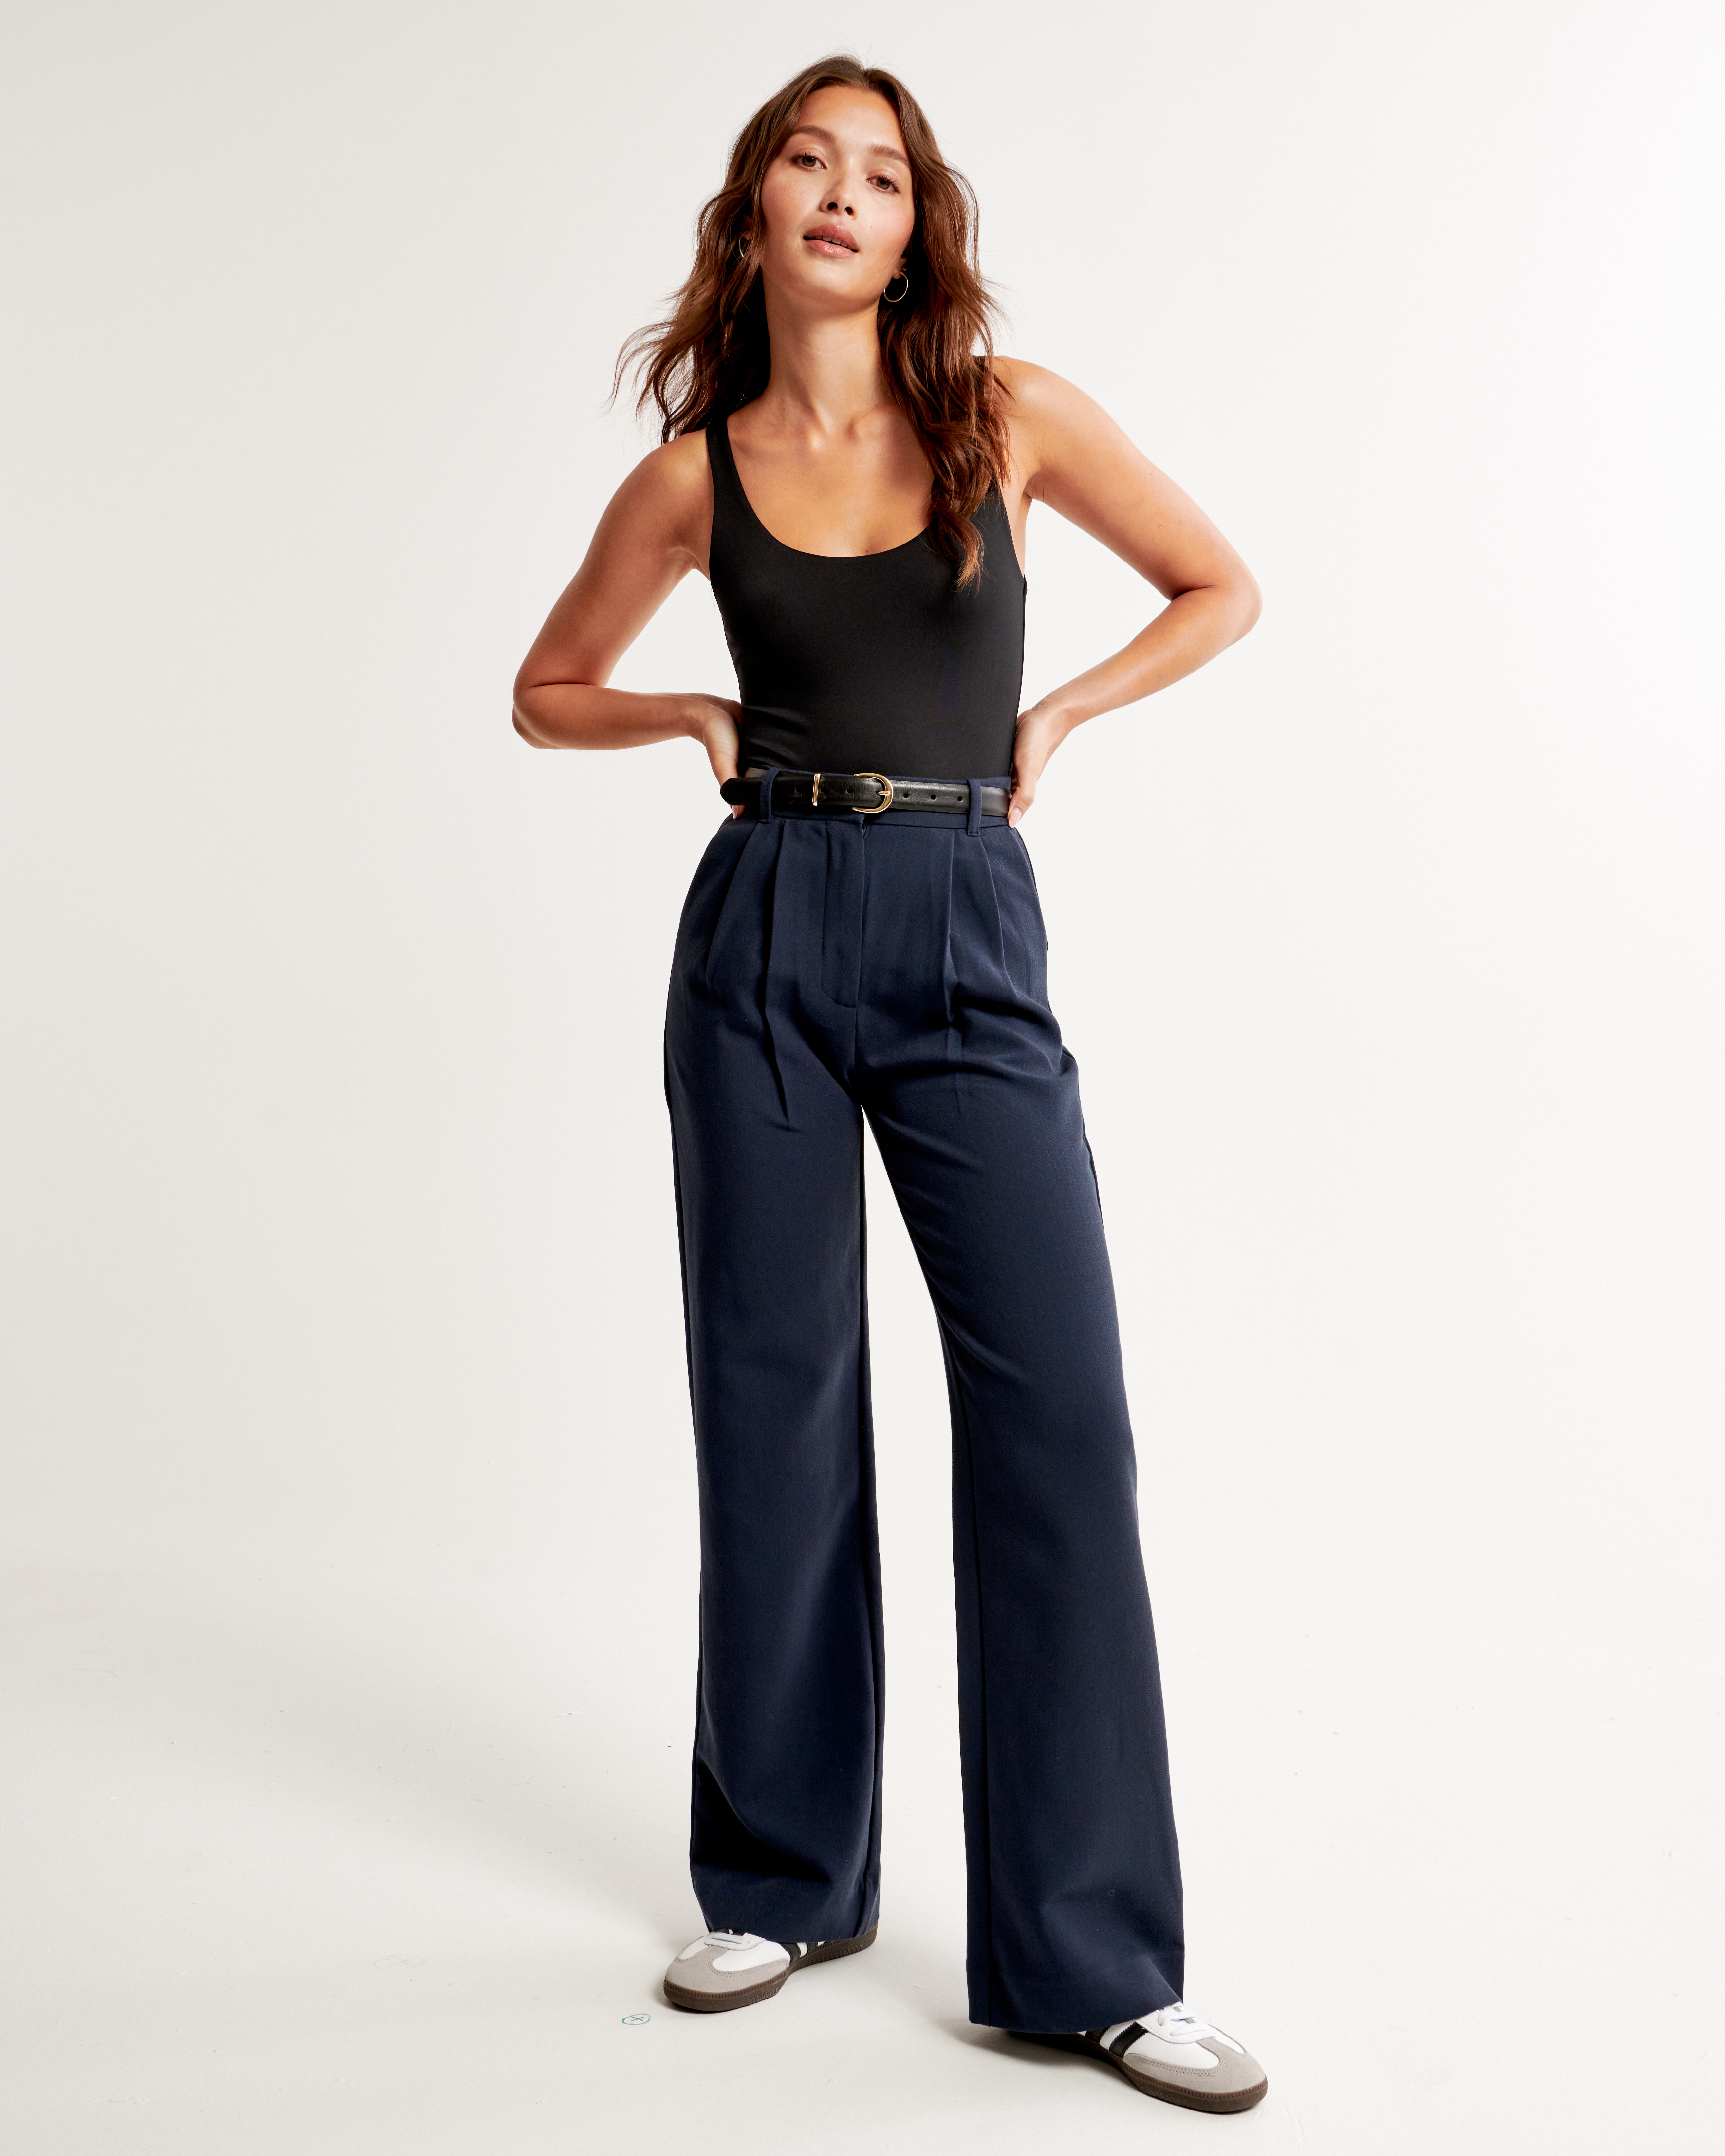 Style & Co Women's Pull On Cuffed Pants, Created for Macy's - Macy's